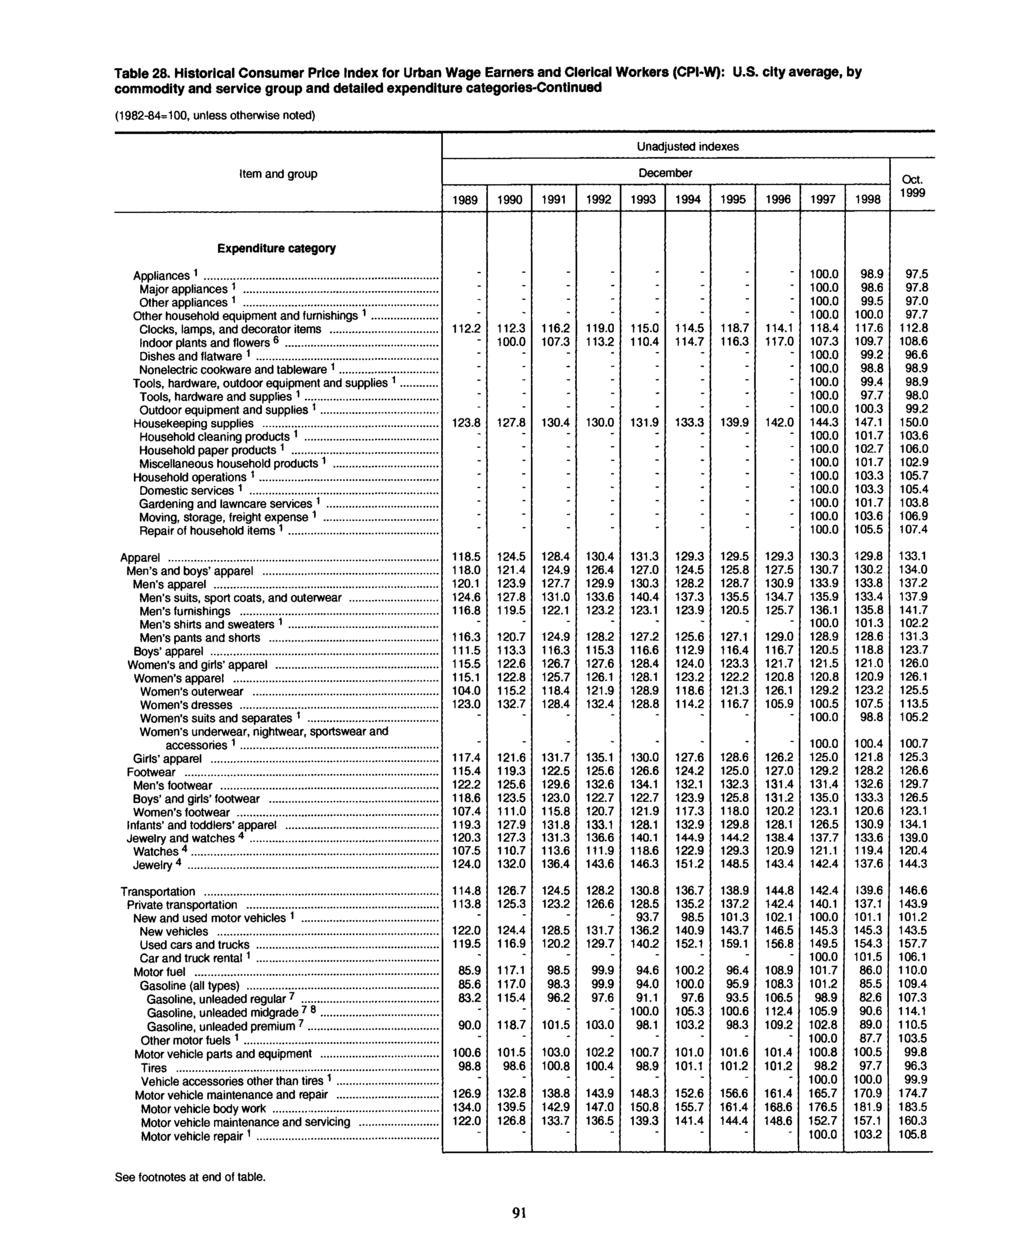 Table 28. Historical Consumer Price for Urban Wage Earners and Clerical Workers (CPI-W): U.S.